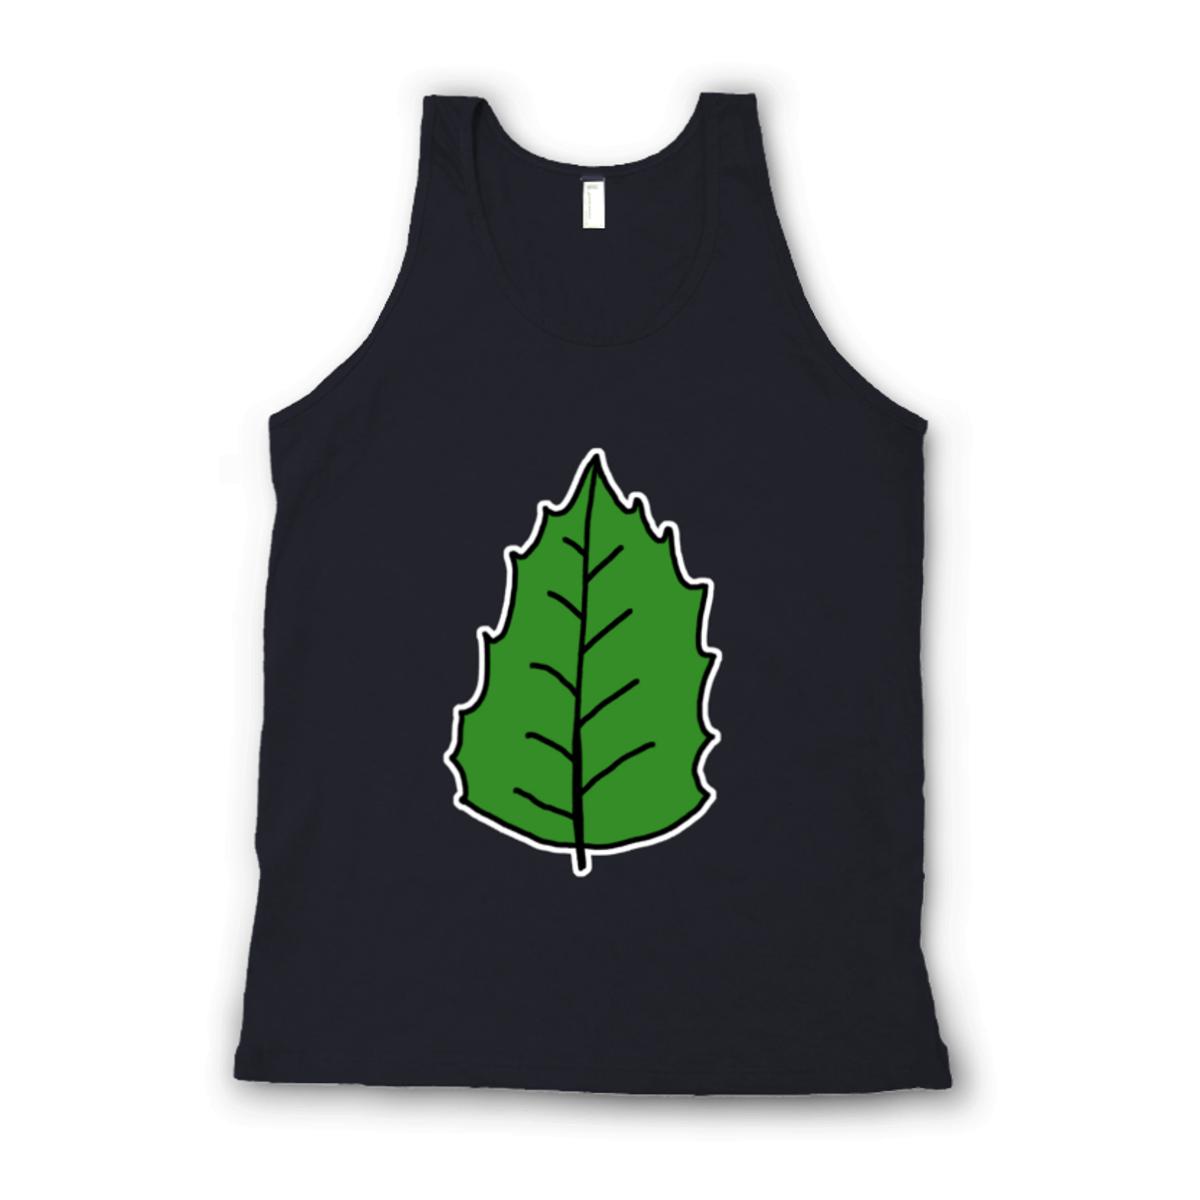 Holly Leaf Unisex Tank Top Extra Small black